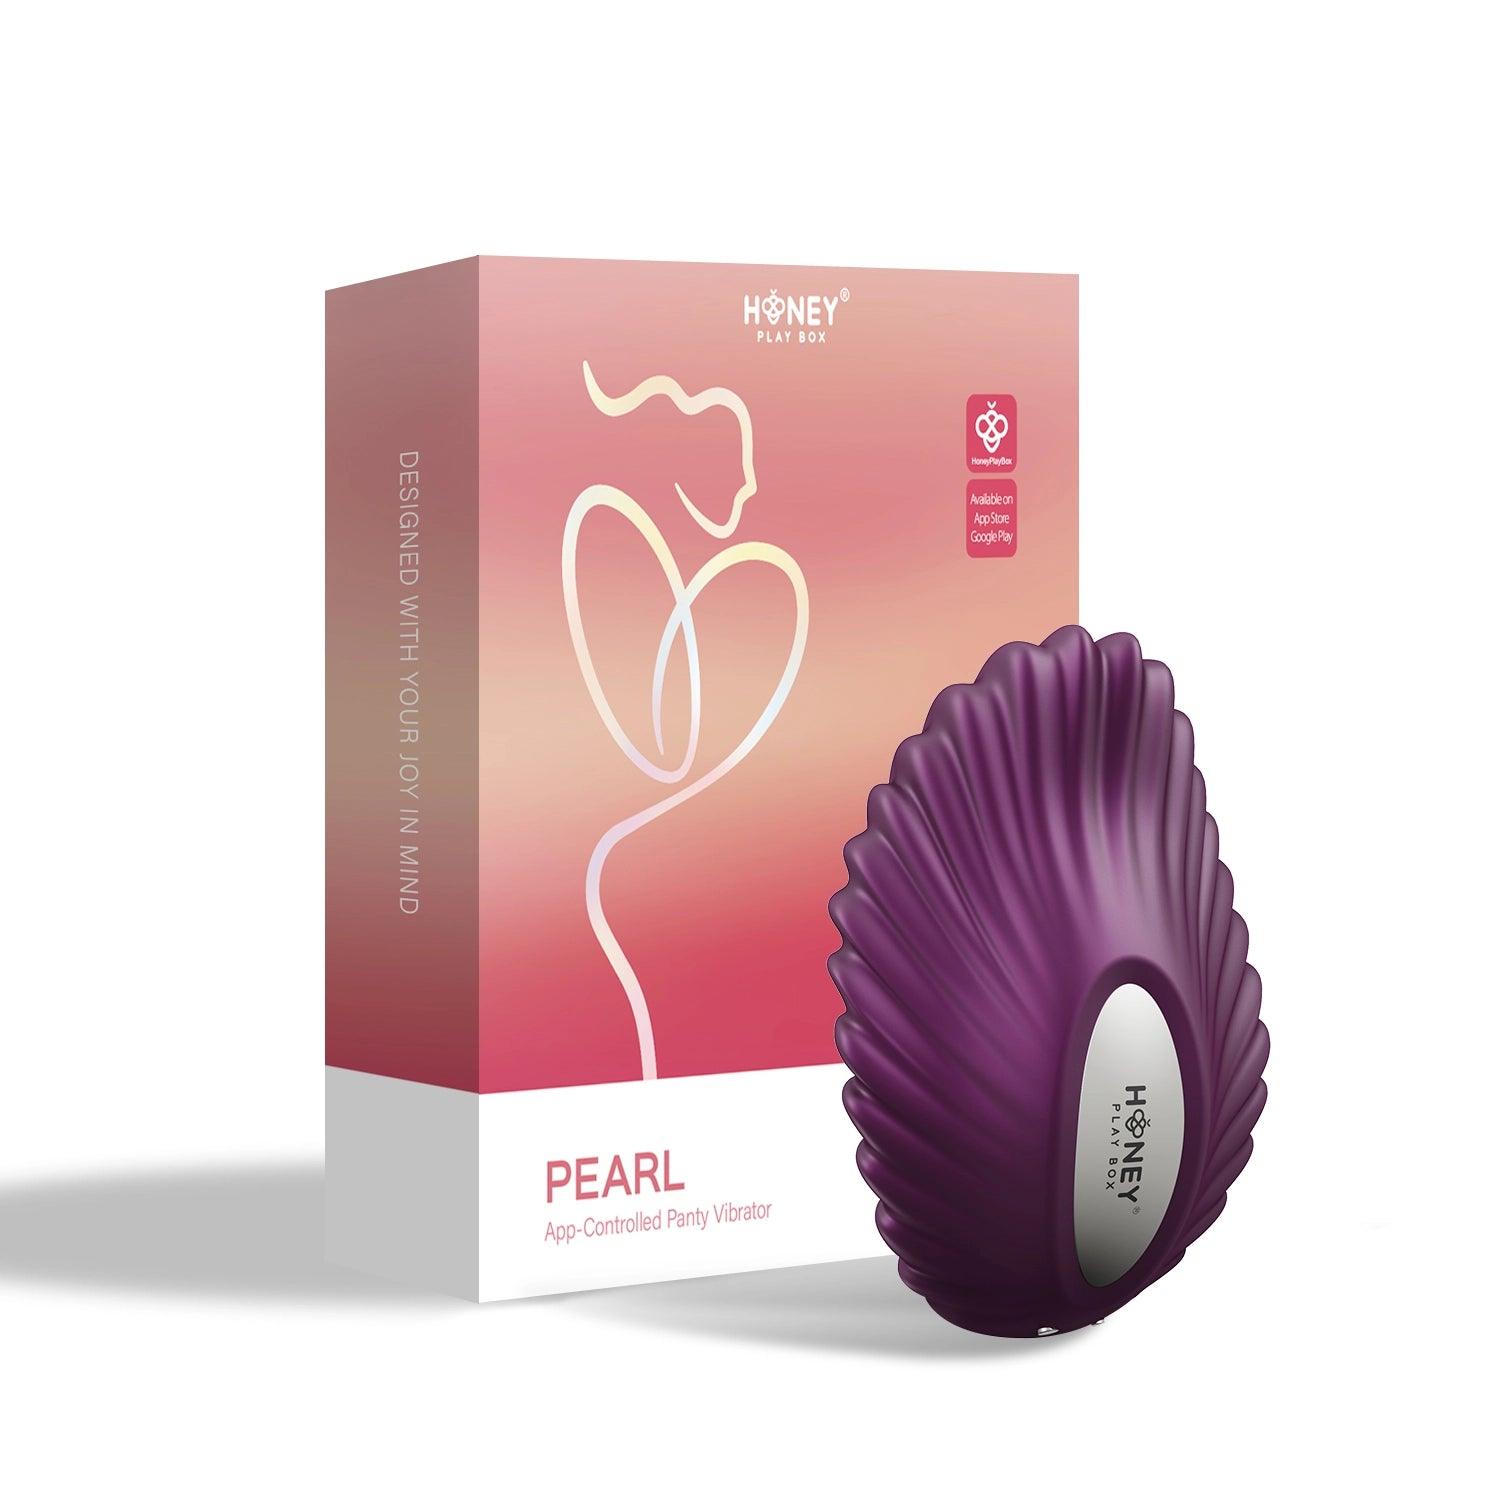 Pearl best app controlled vibrator